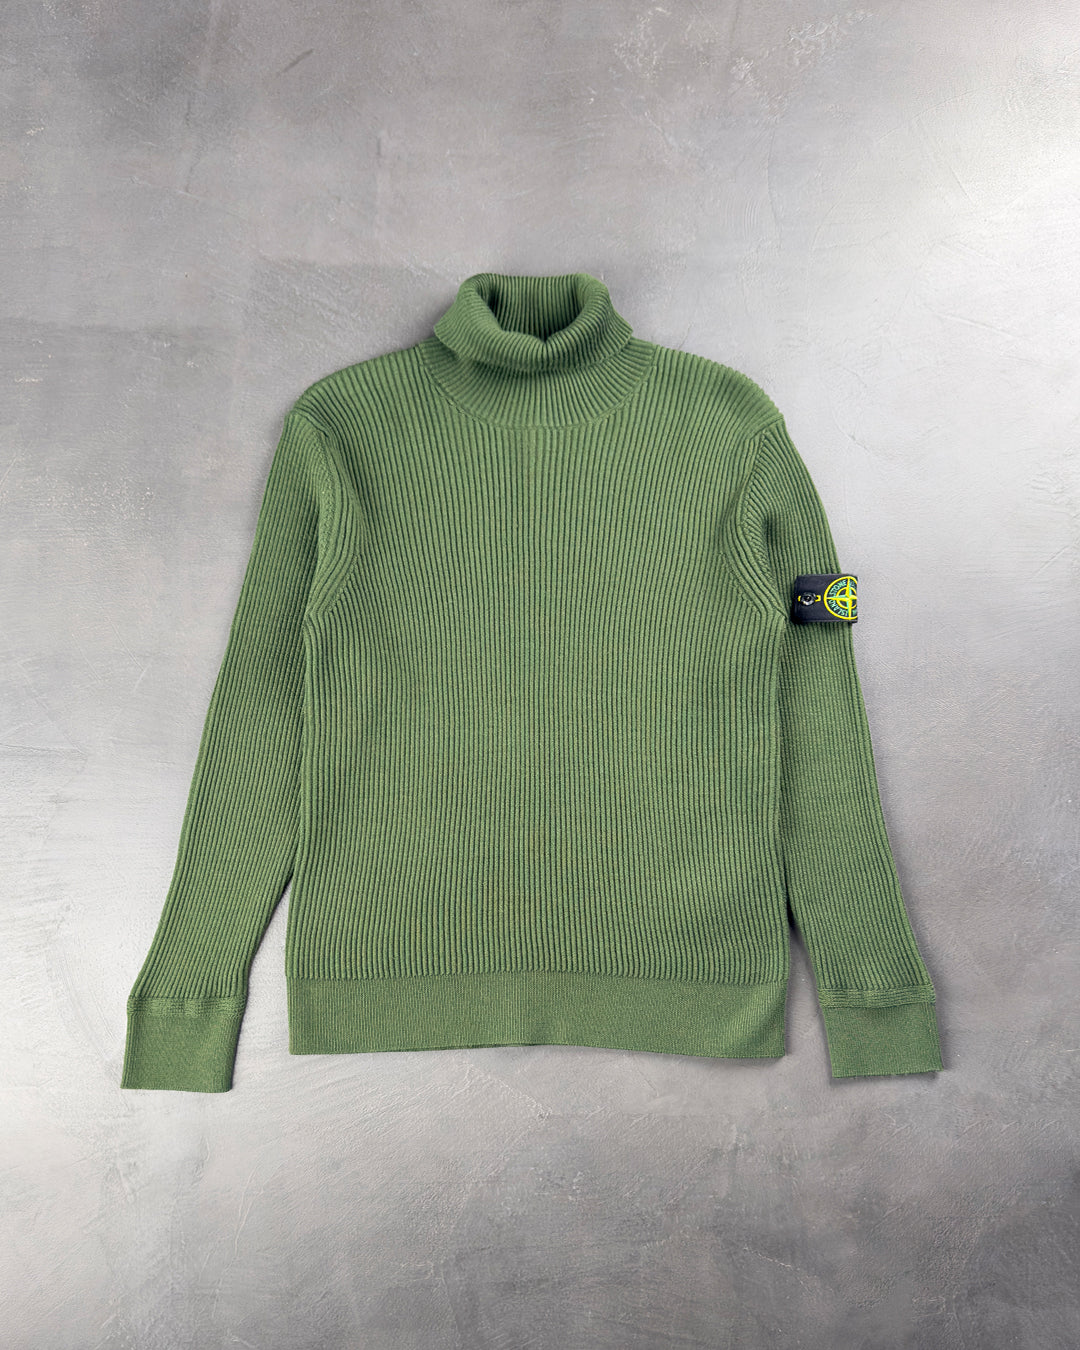 552C2 Turtle Neck Knit Sweater Olive SI0181-OL